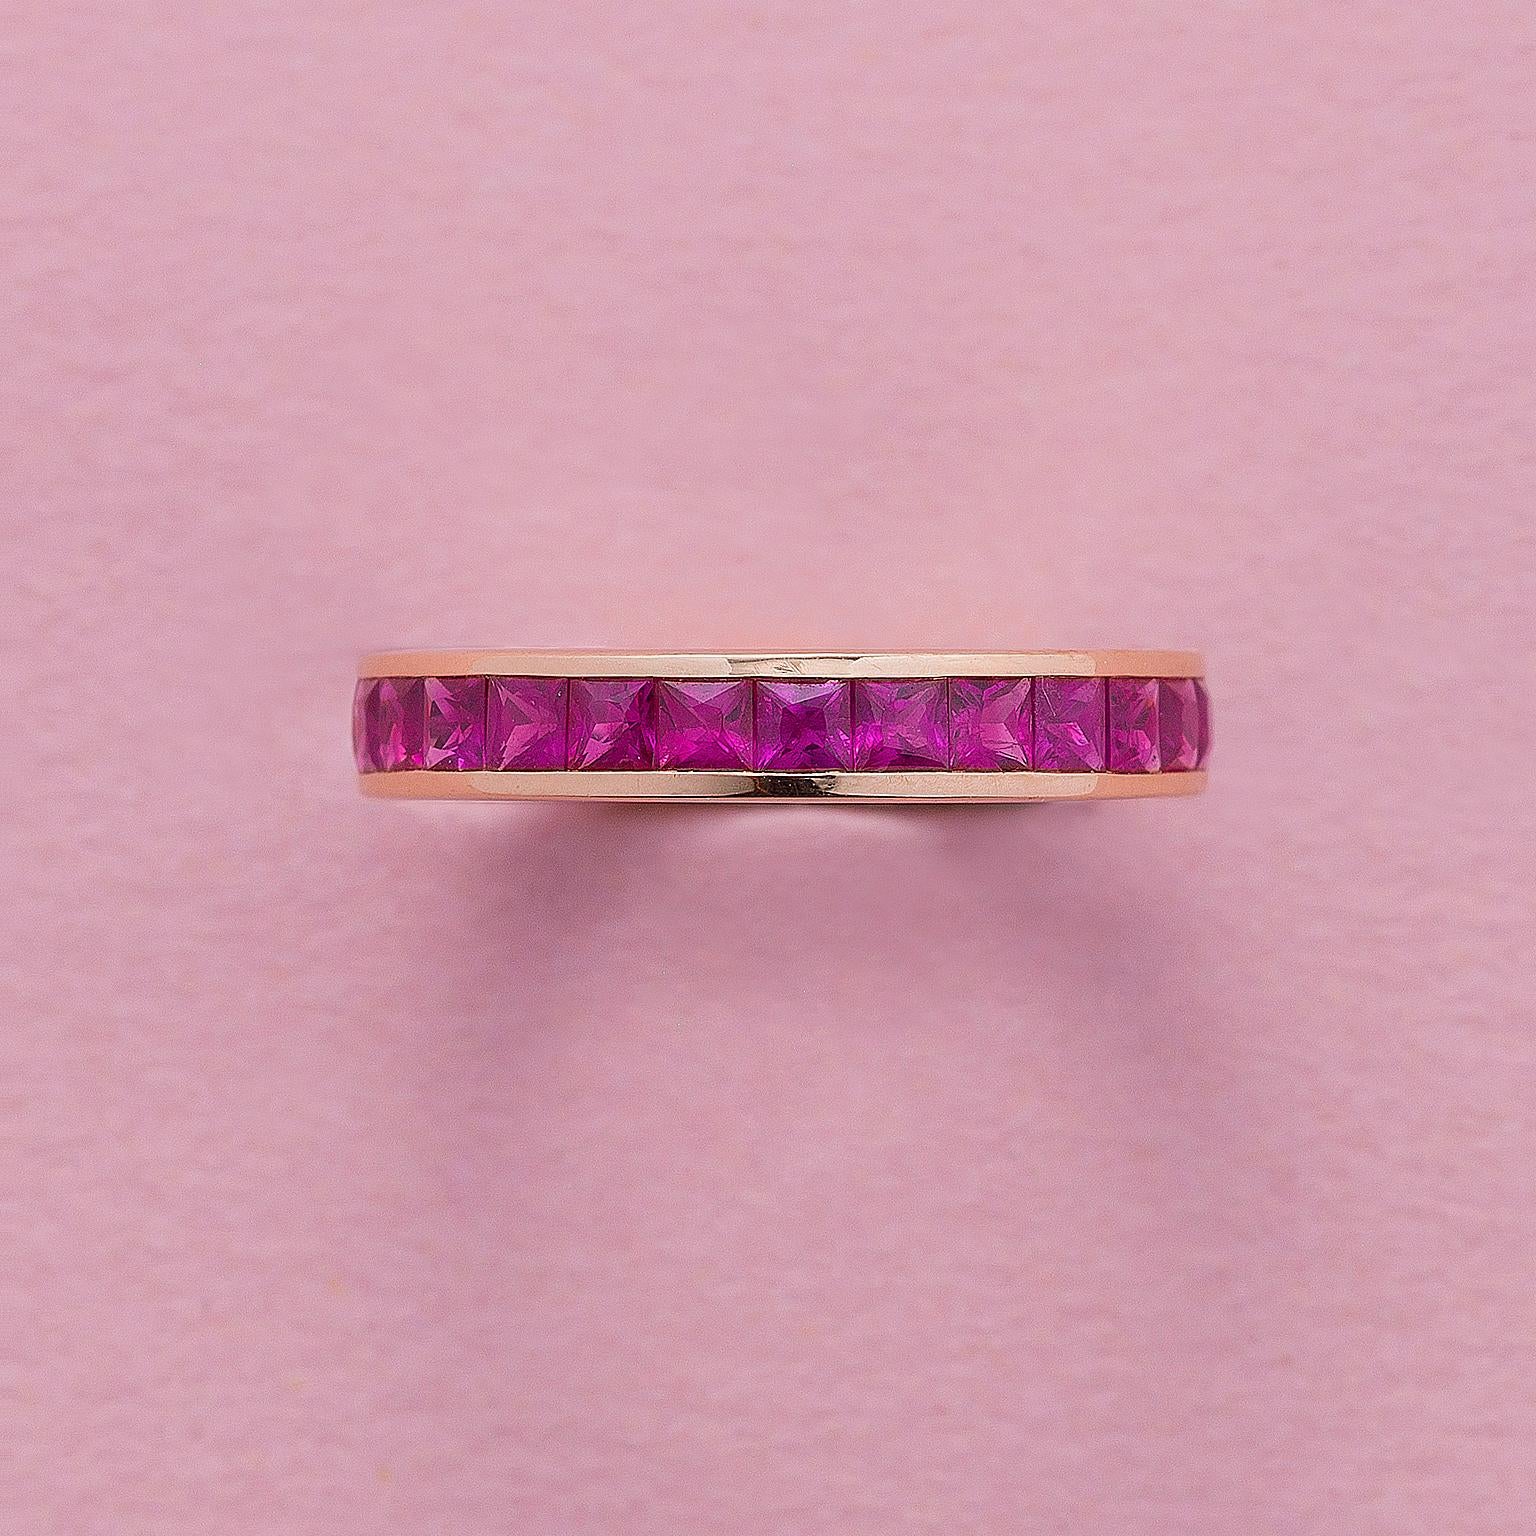 An 18 carat rosé gold eternity band ring with carré cut ruby (2.45 carat in total) set in a rails setting.
weight: 3.13 grams
ring size: 17 mm / 6 ¾ US
width: 3.7 mm